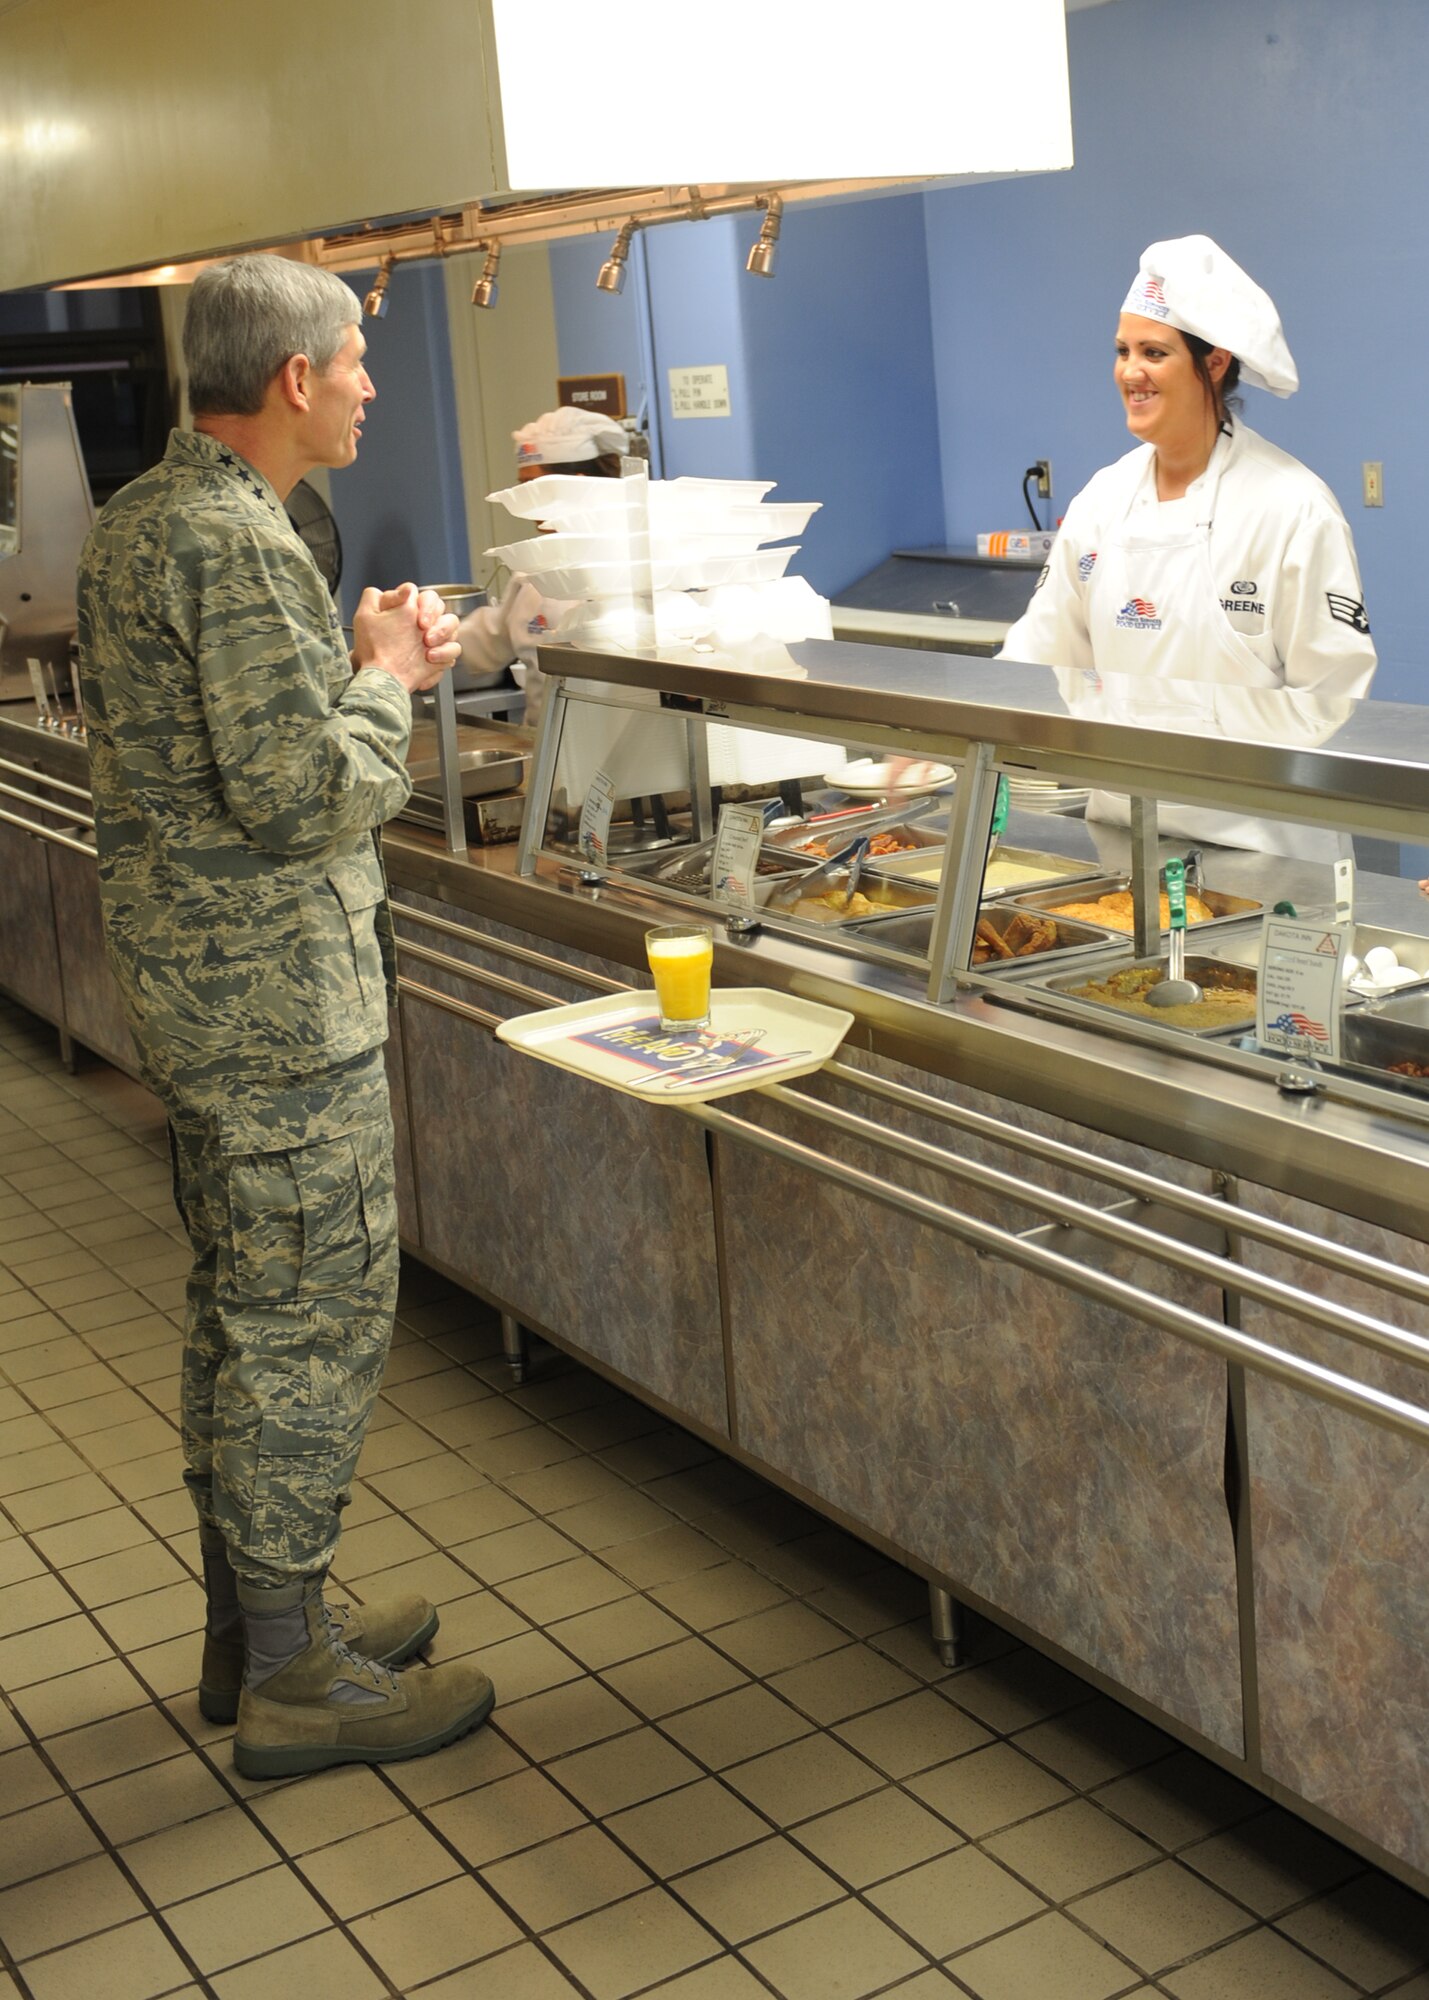 MINOT AIR FORCE BASE, N.D. -- Air Force Chief of Staff Gen. Norton Schwartz places his food order with Senior Airman Brittany Greene, 5th Force Support Squadron first cook, at the Dakota Inn dining facility here April 2.  General Schwartz’s visit was to reassure the men and women of Minot Air Force Base that the Air Force has complete confidence in their mission and their role in the nuclear enterprise.  (U.S. Air Force photo by Staff Sgt. Keith Ballard)